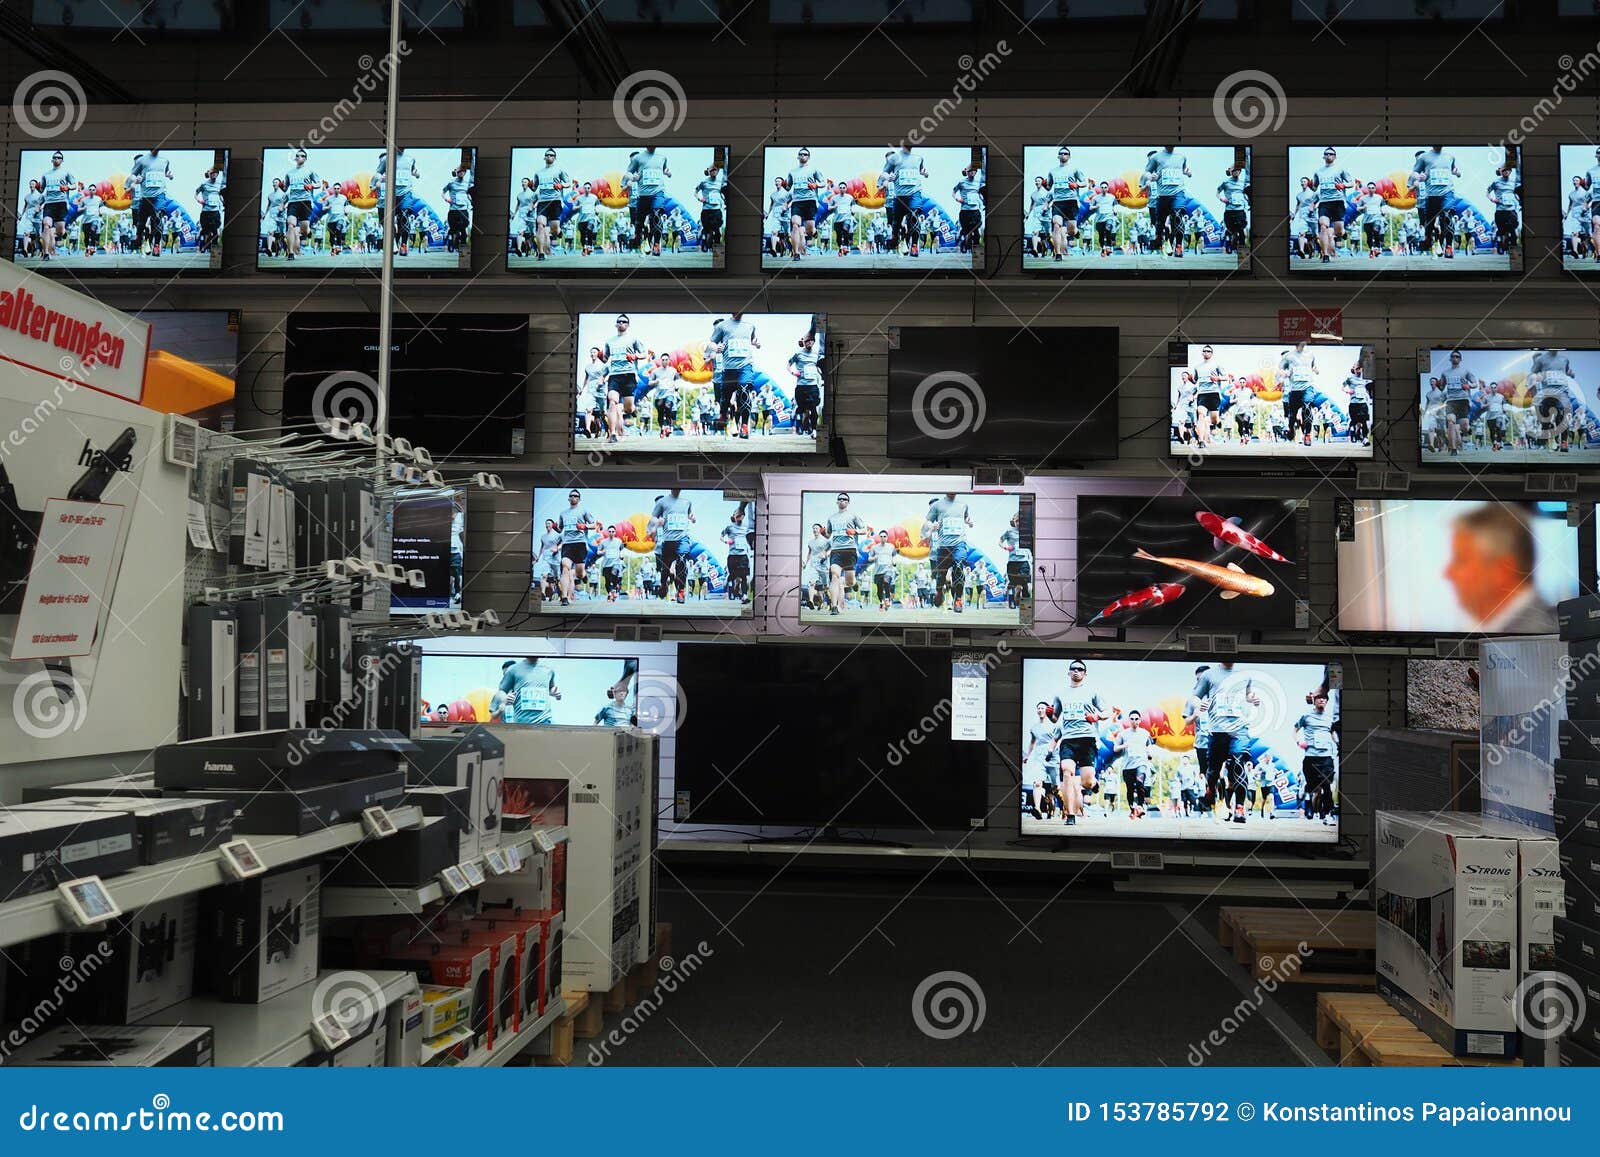 Media Markt in Offenburg, , Photography - of display, computer: 153785792